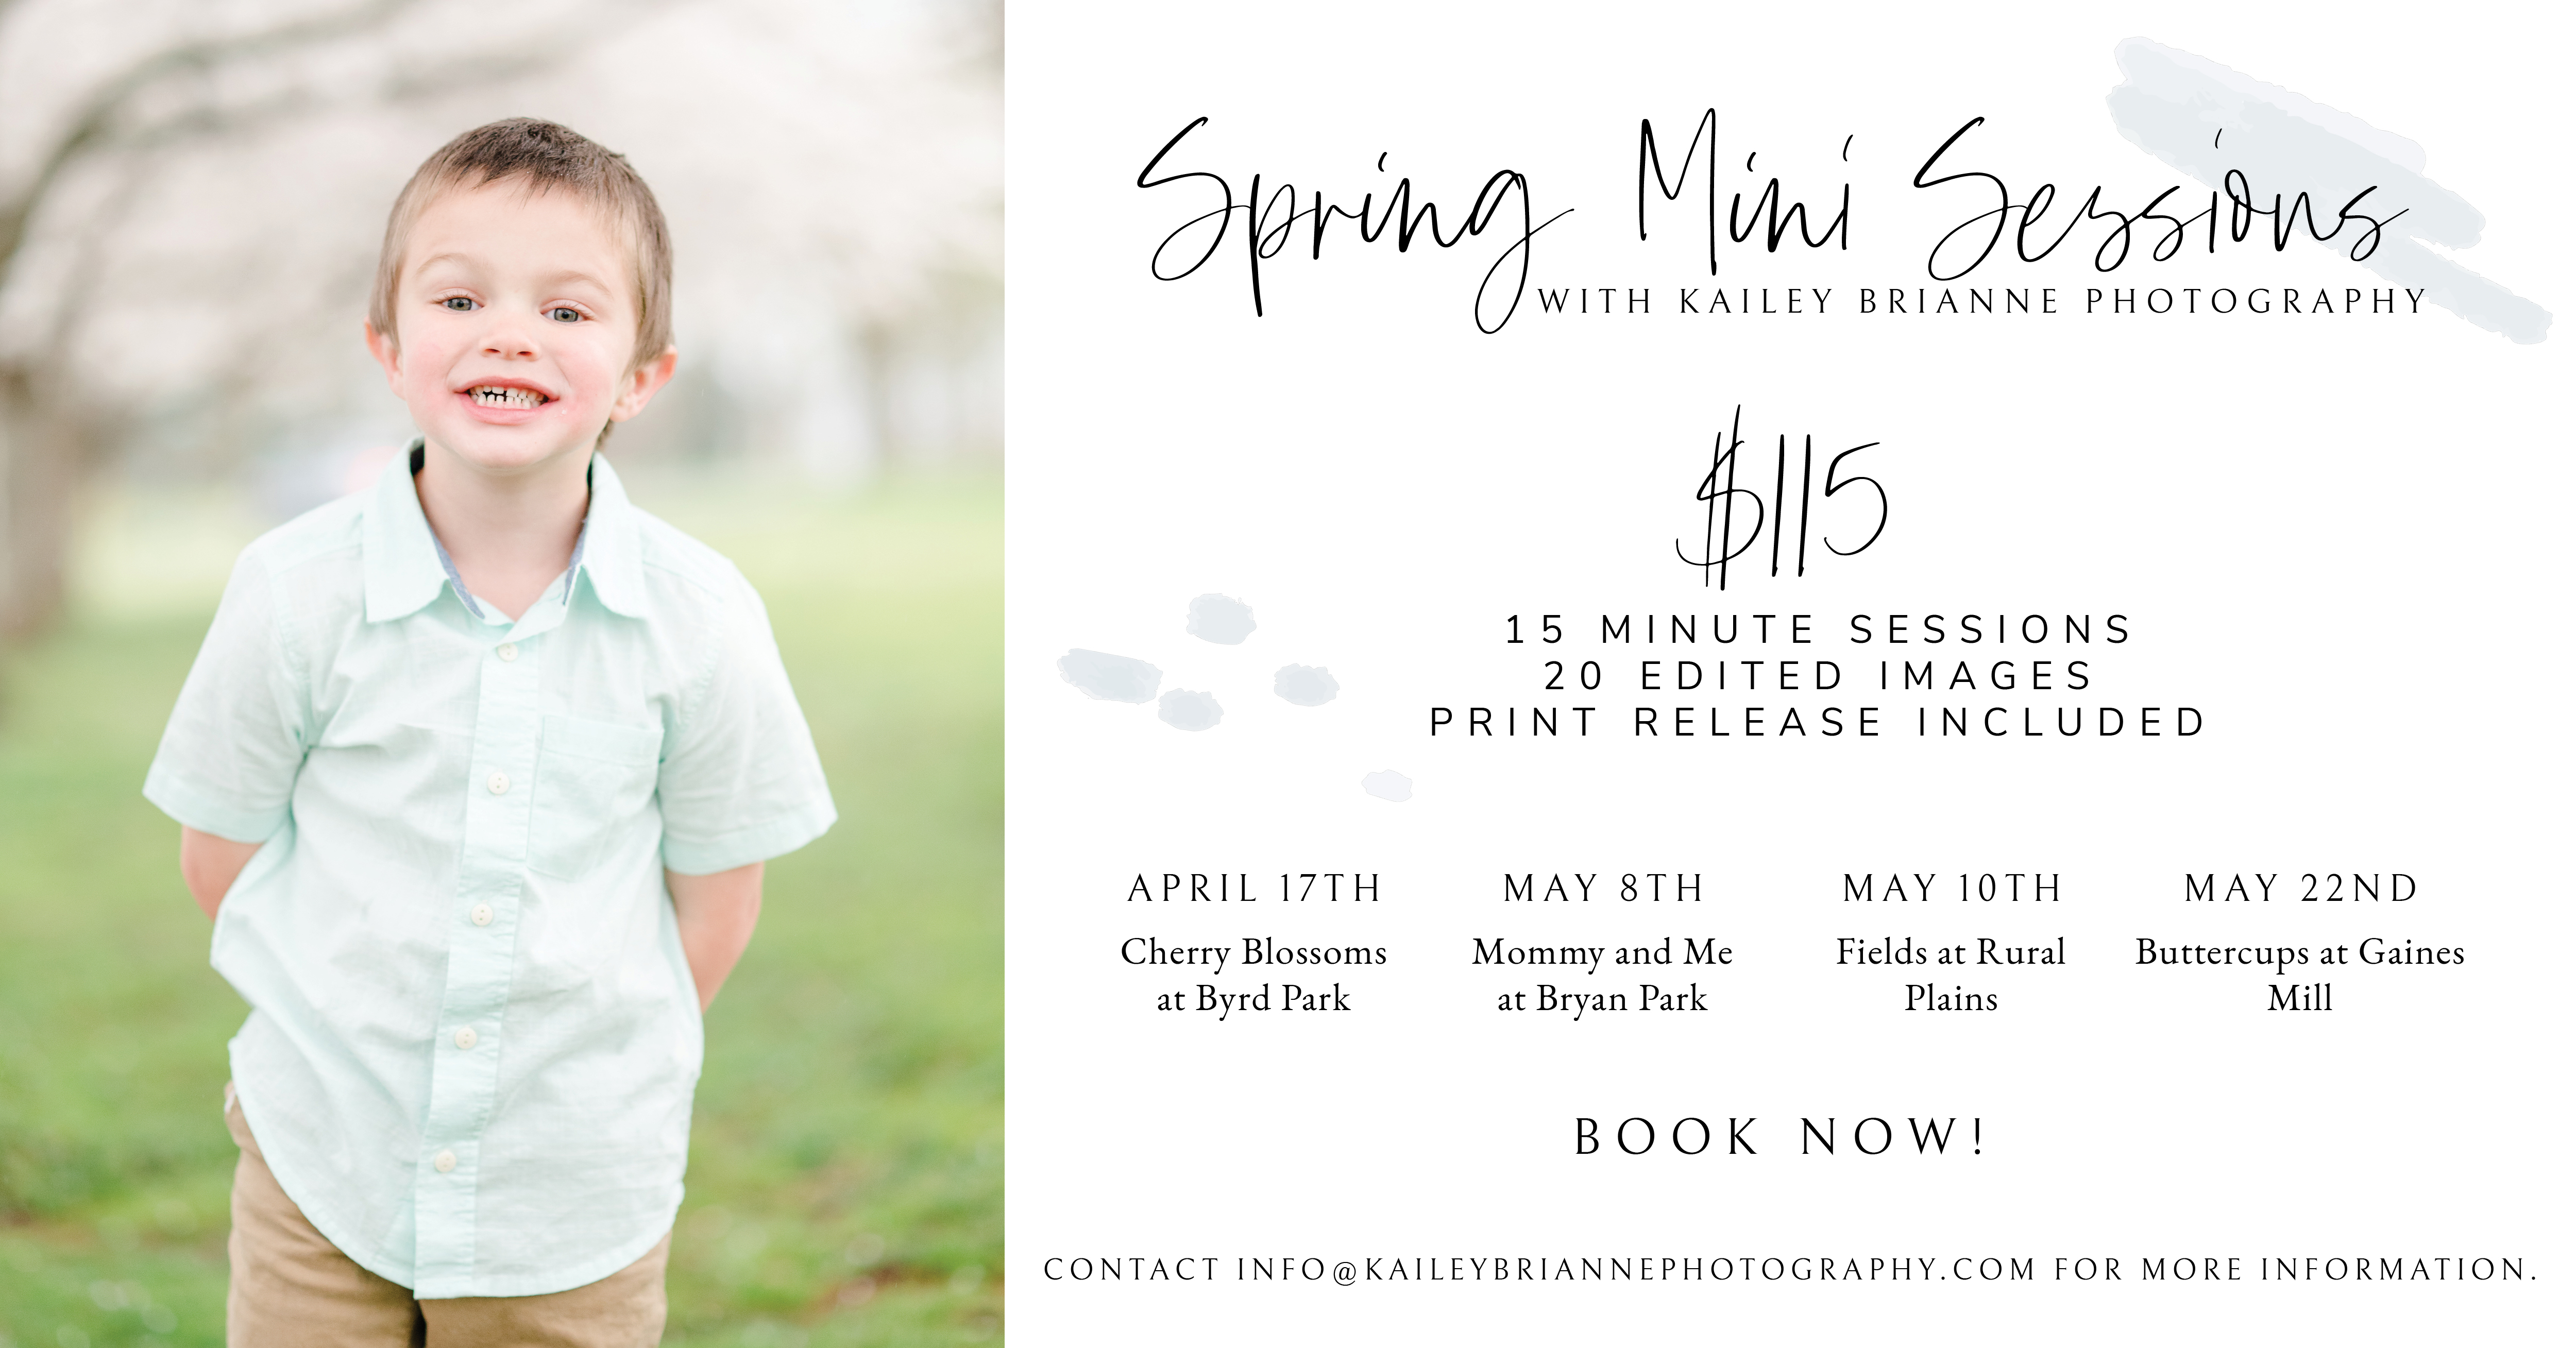 Spring Mini Session in Richmond, Virginia. Cherry Blossom Mini Session by Richmond family photographer Kailey Brianne Photography. 